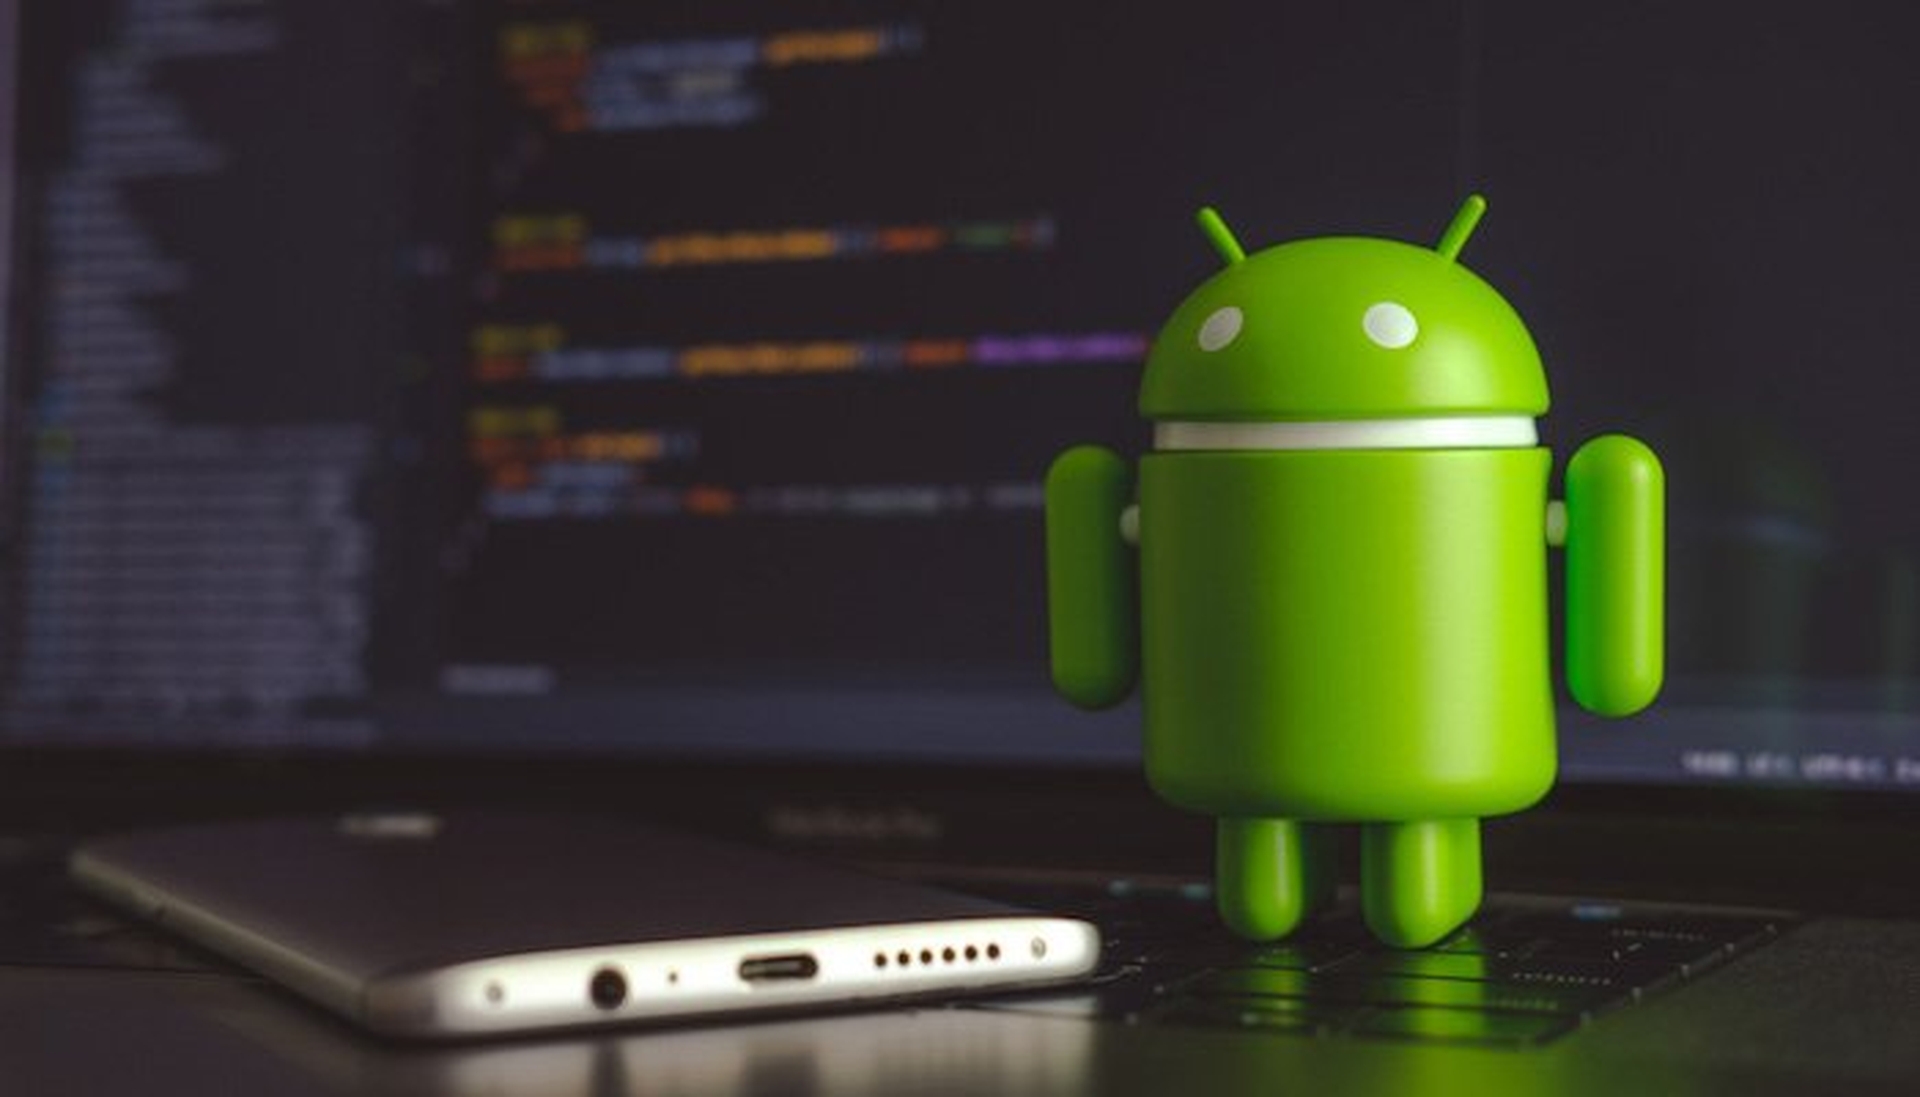 There are so many apps on the Play Store that sometimes users might download some that are not safe. Here are the Android apps that steal data from users in 2022.